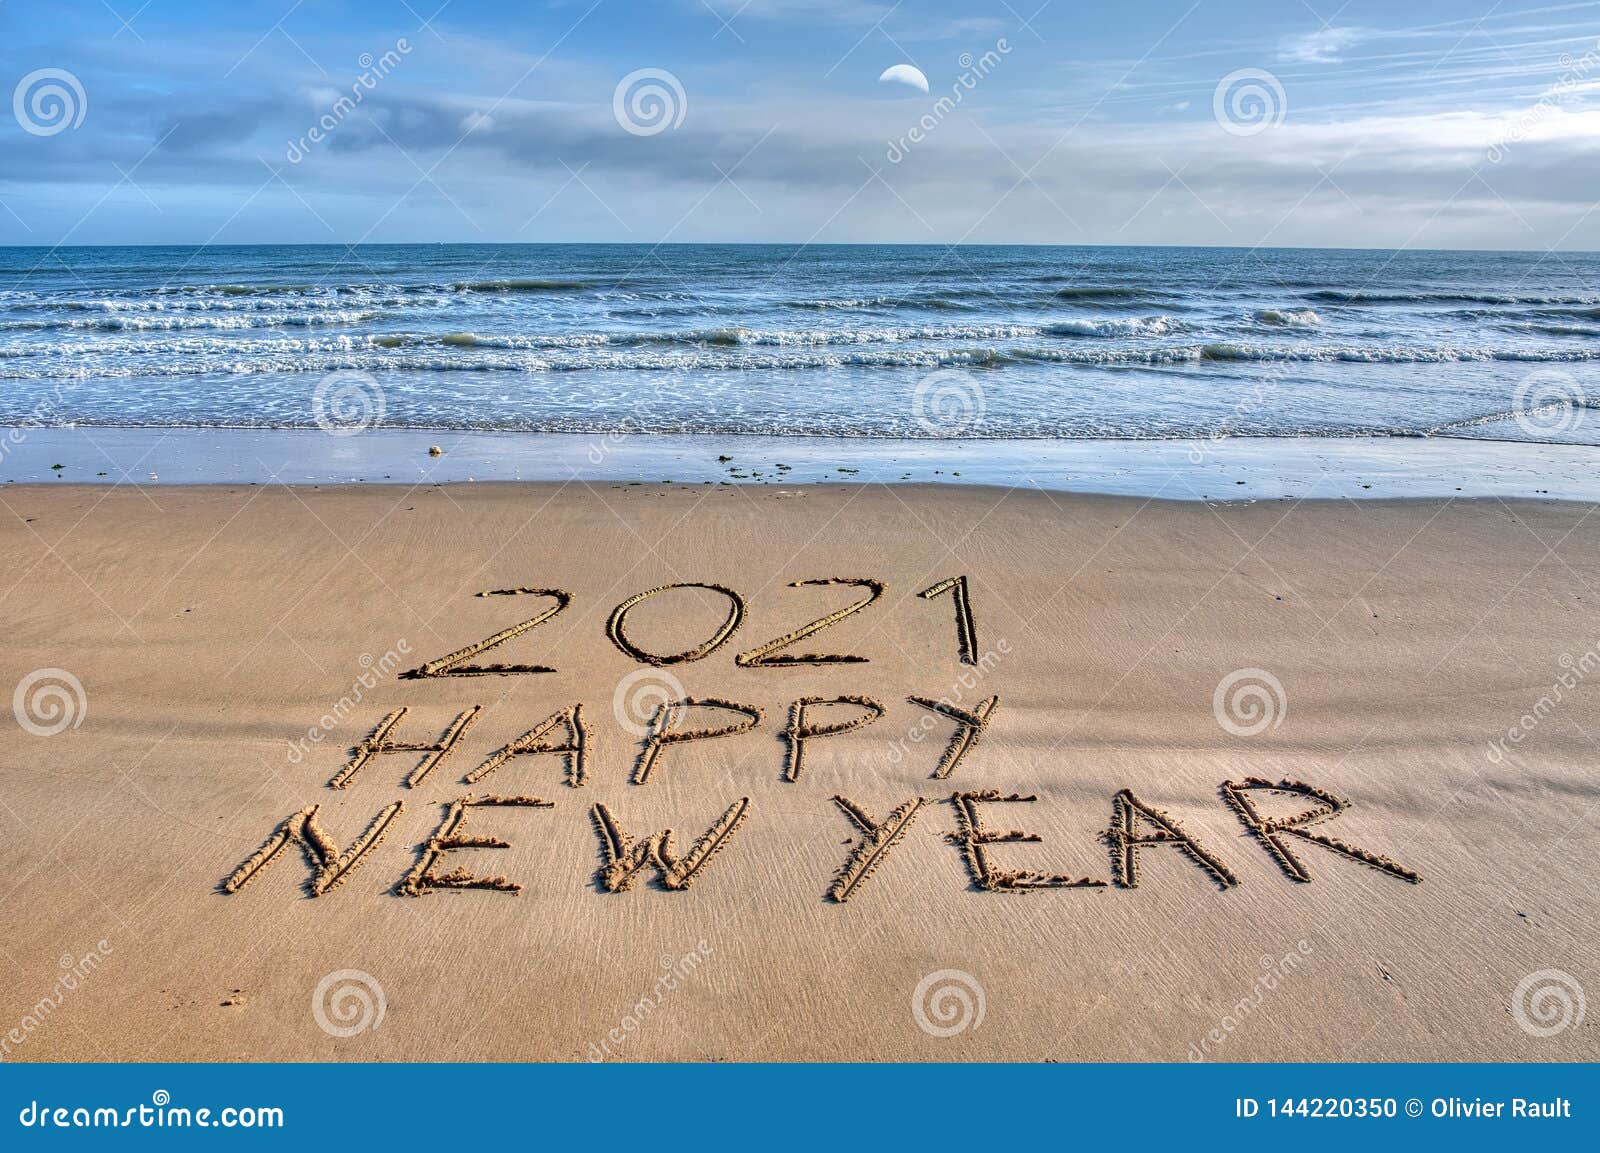 France happy new year 2021 stock photo. Image of wave 